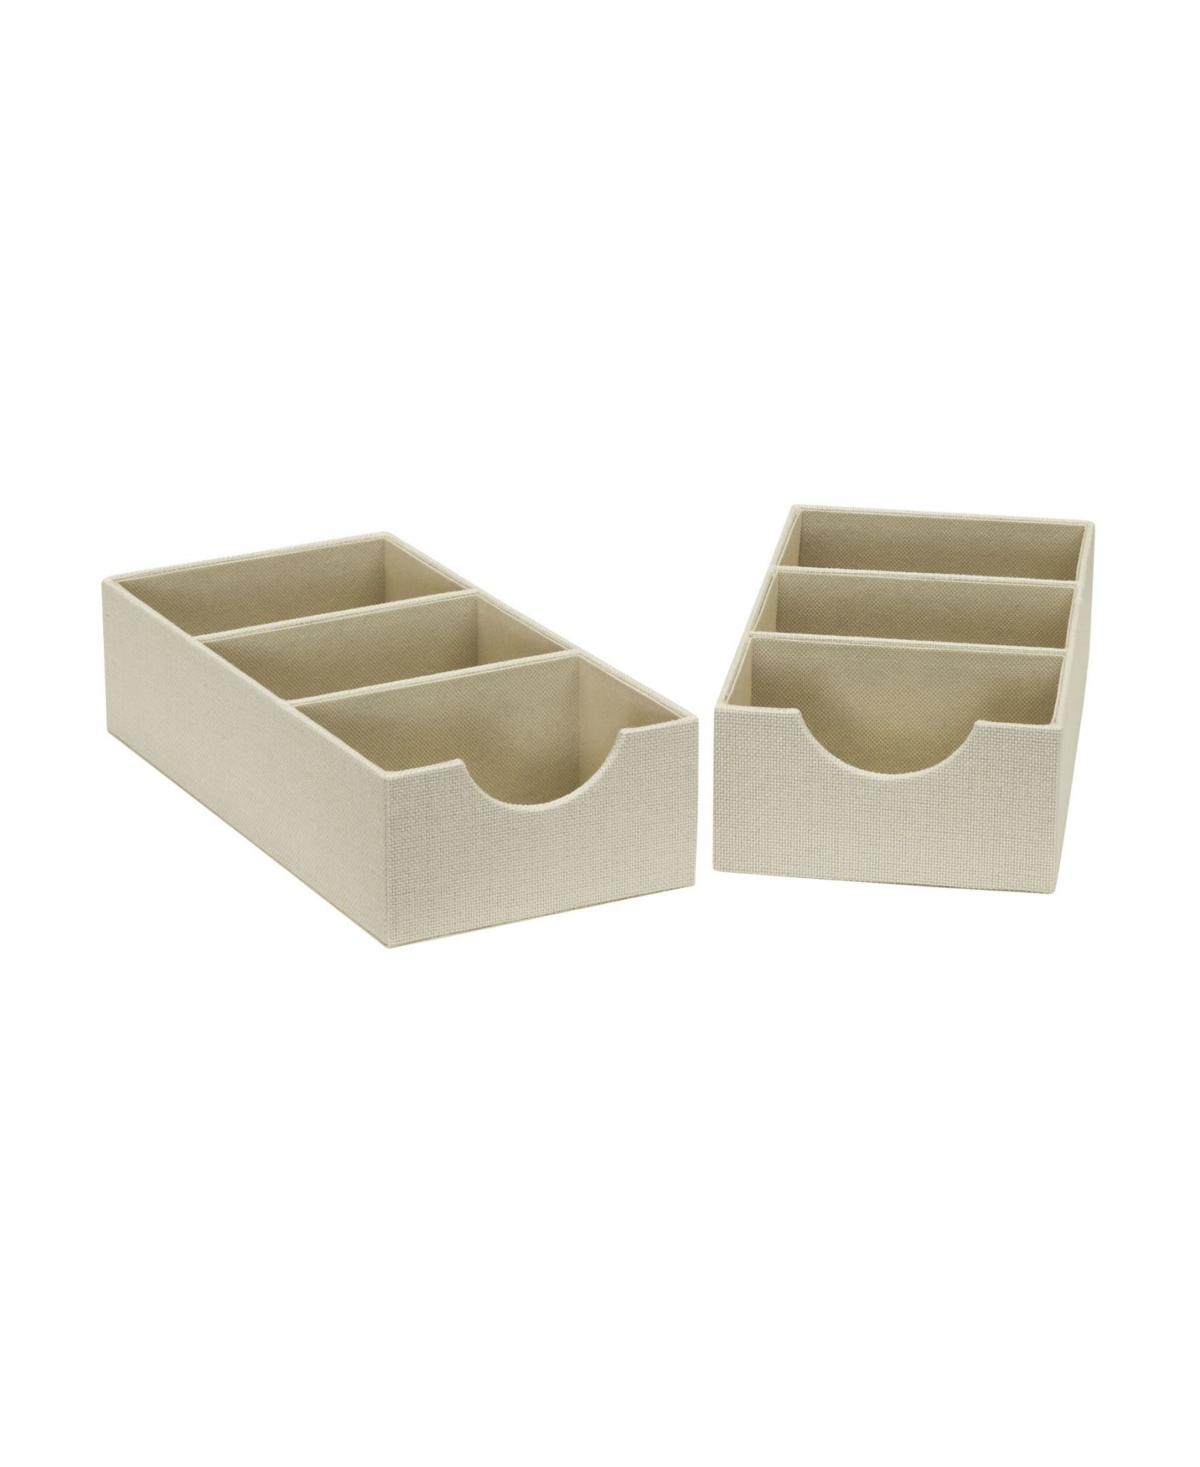 3-Compartment Drawer Organizers, Set of 2 - Cream Linen